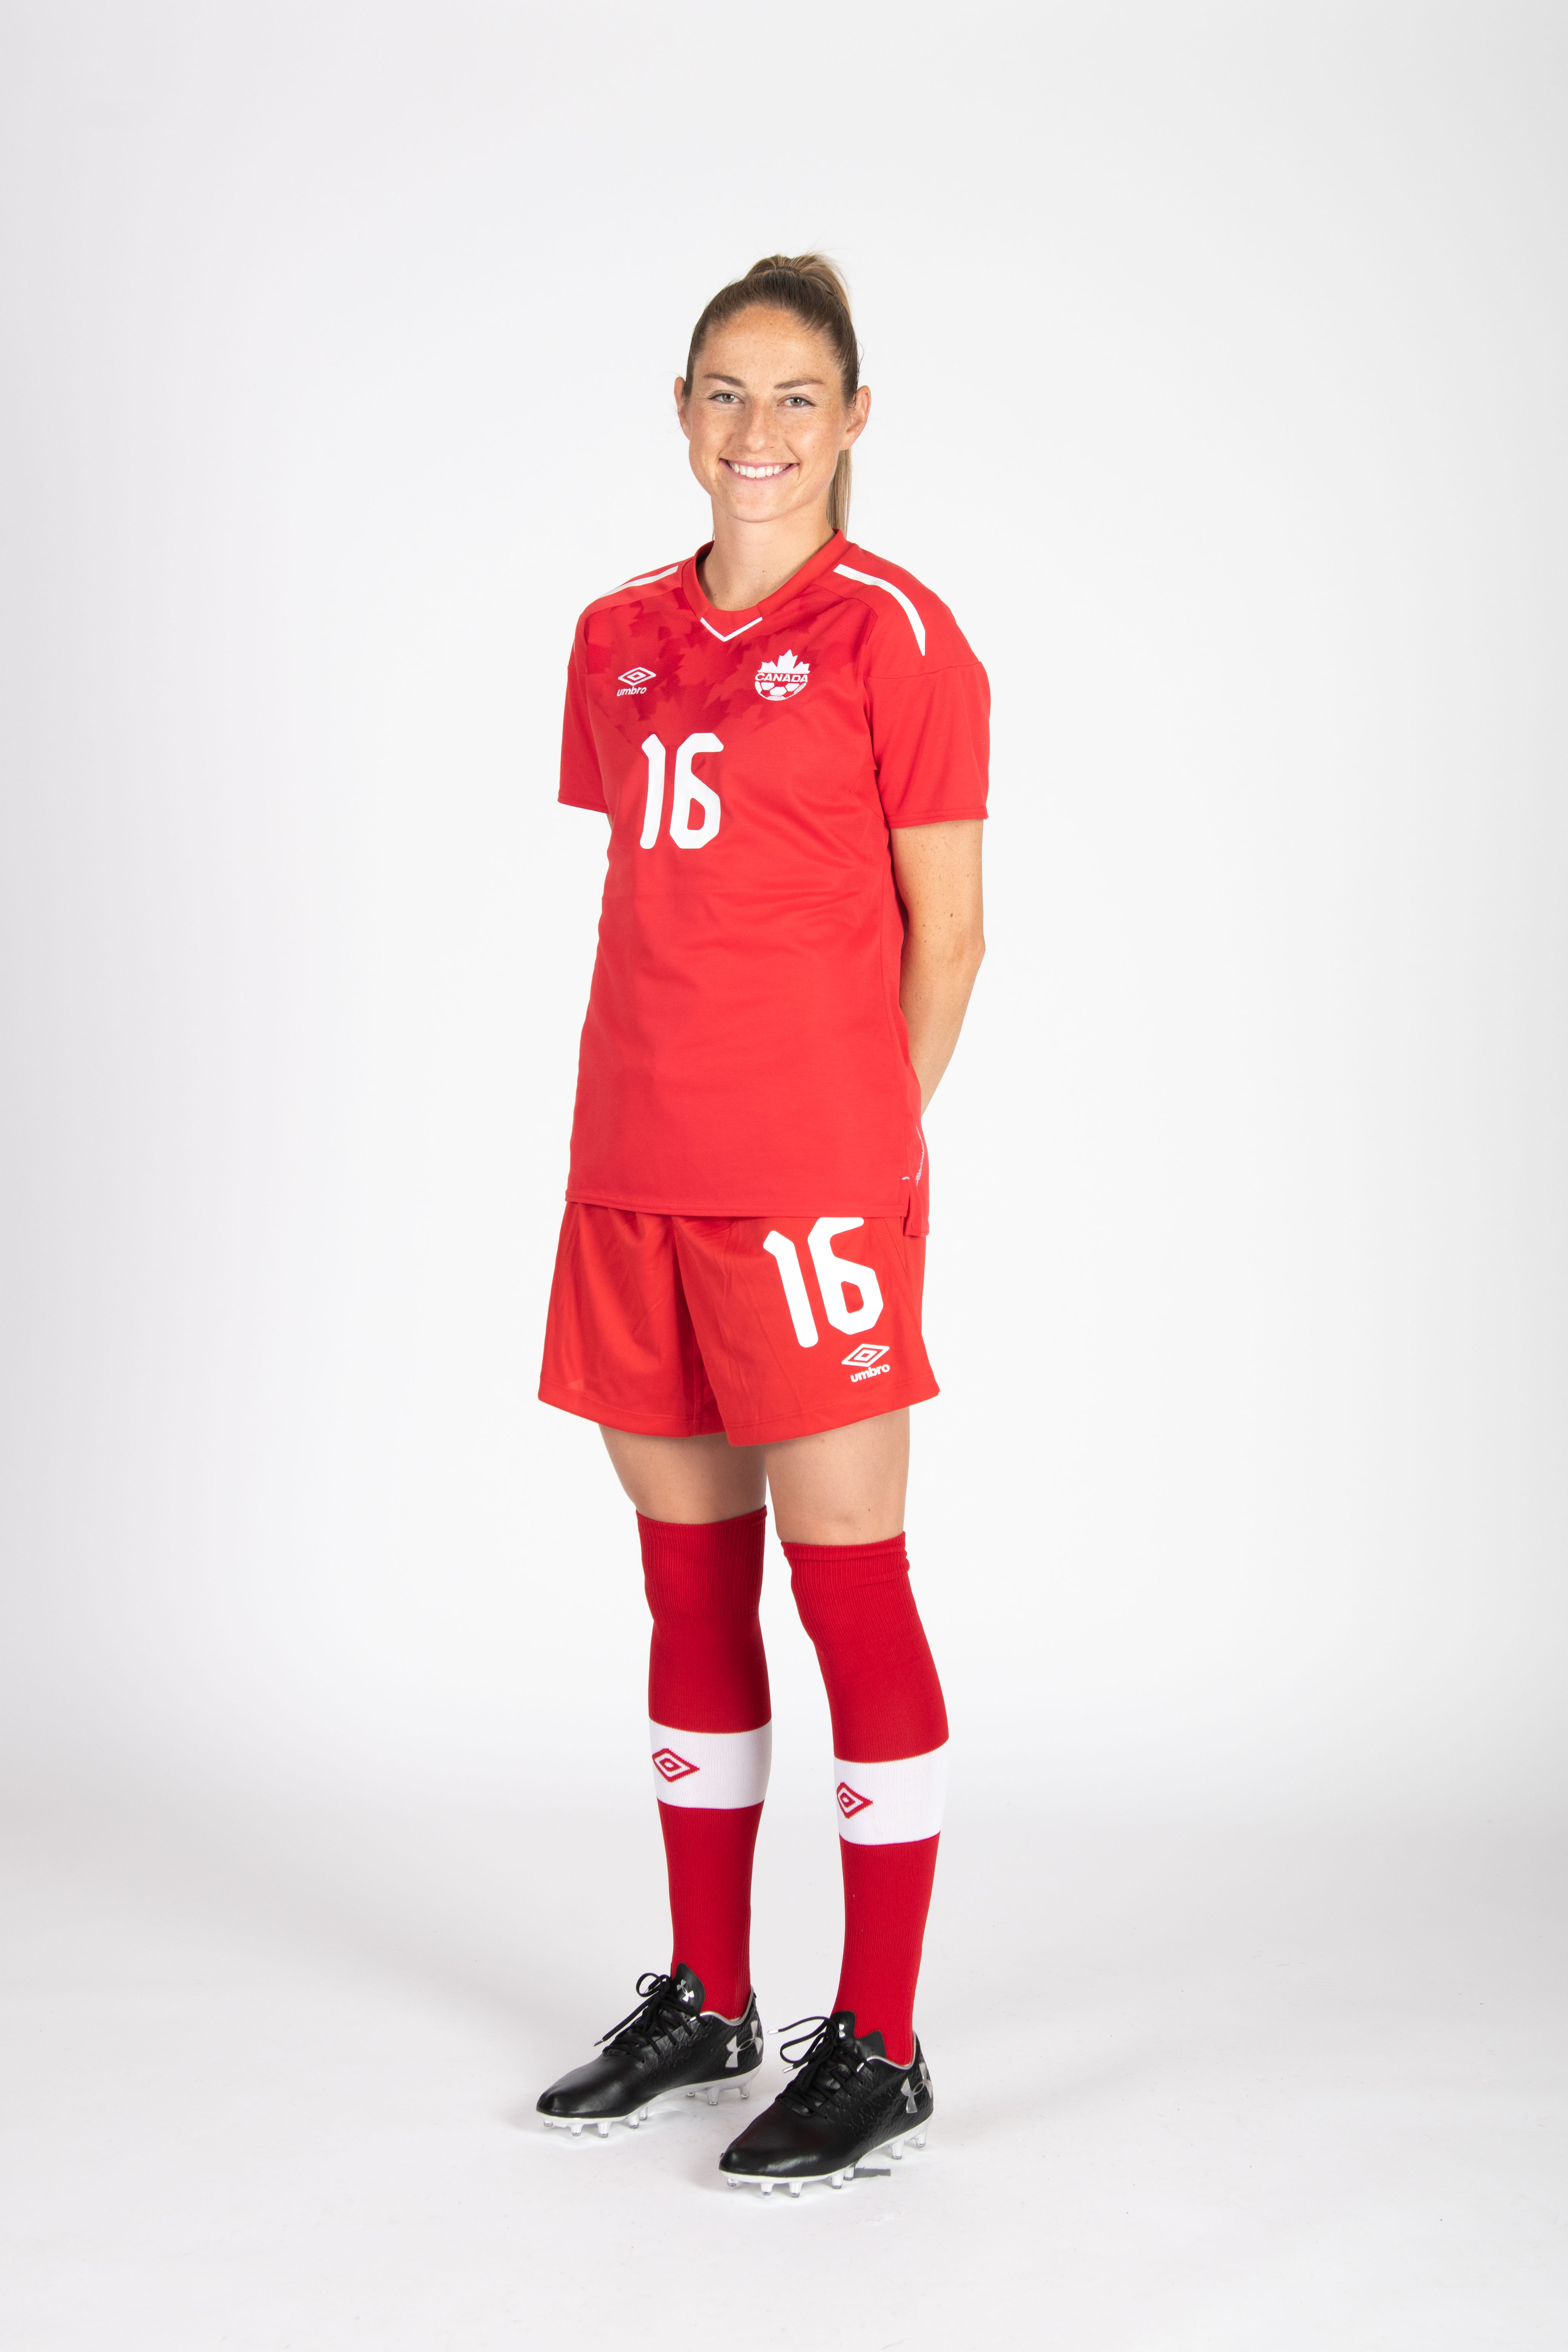 20180604_CANWNT_Beckie_byBazyl20